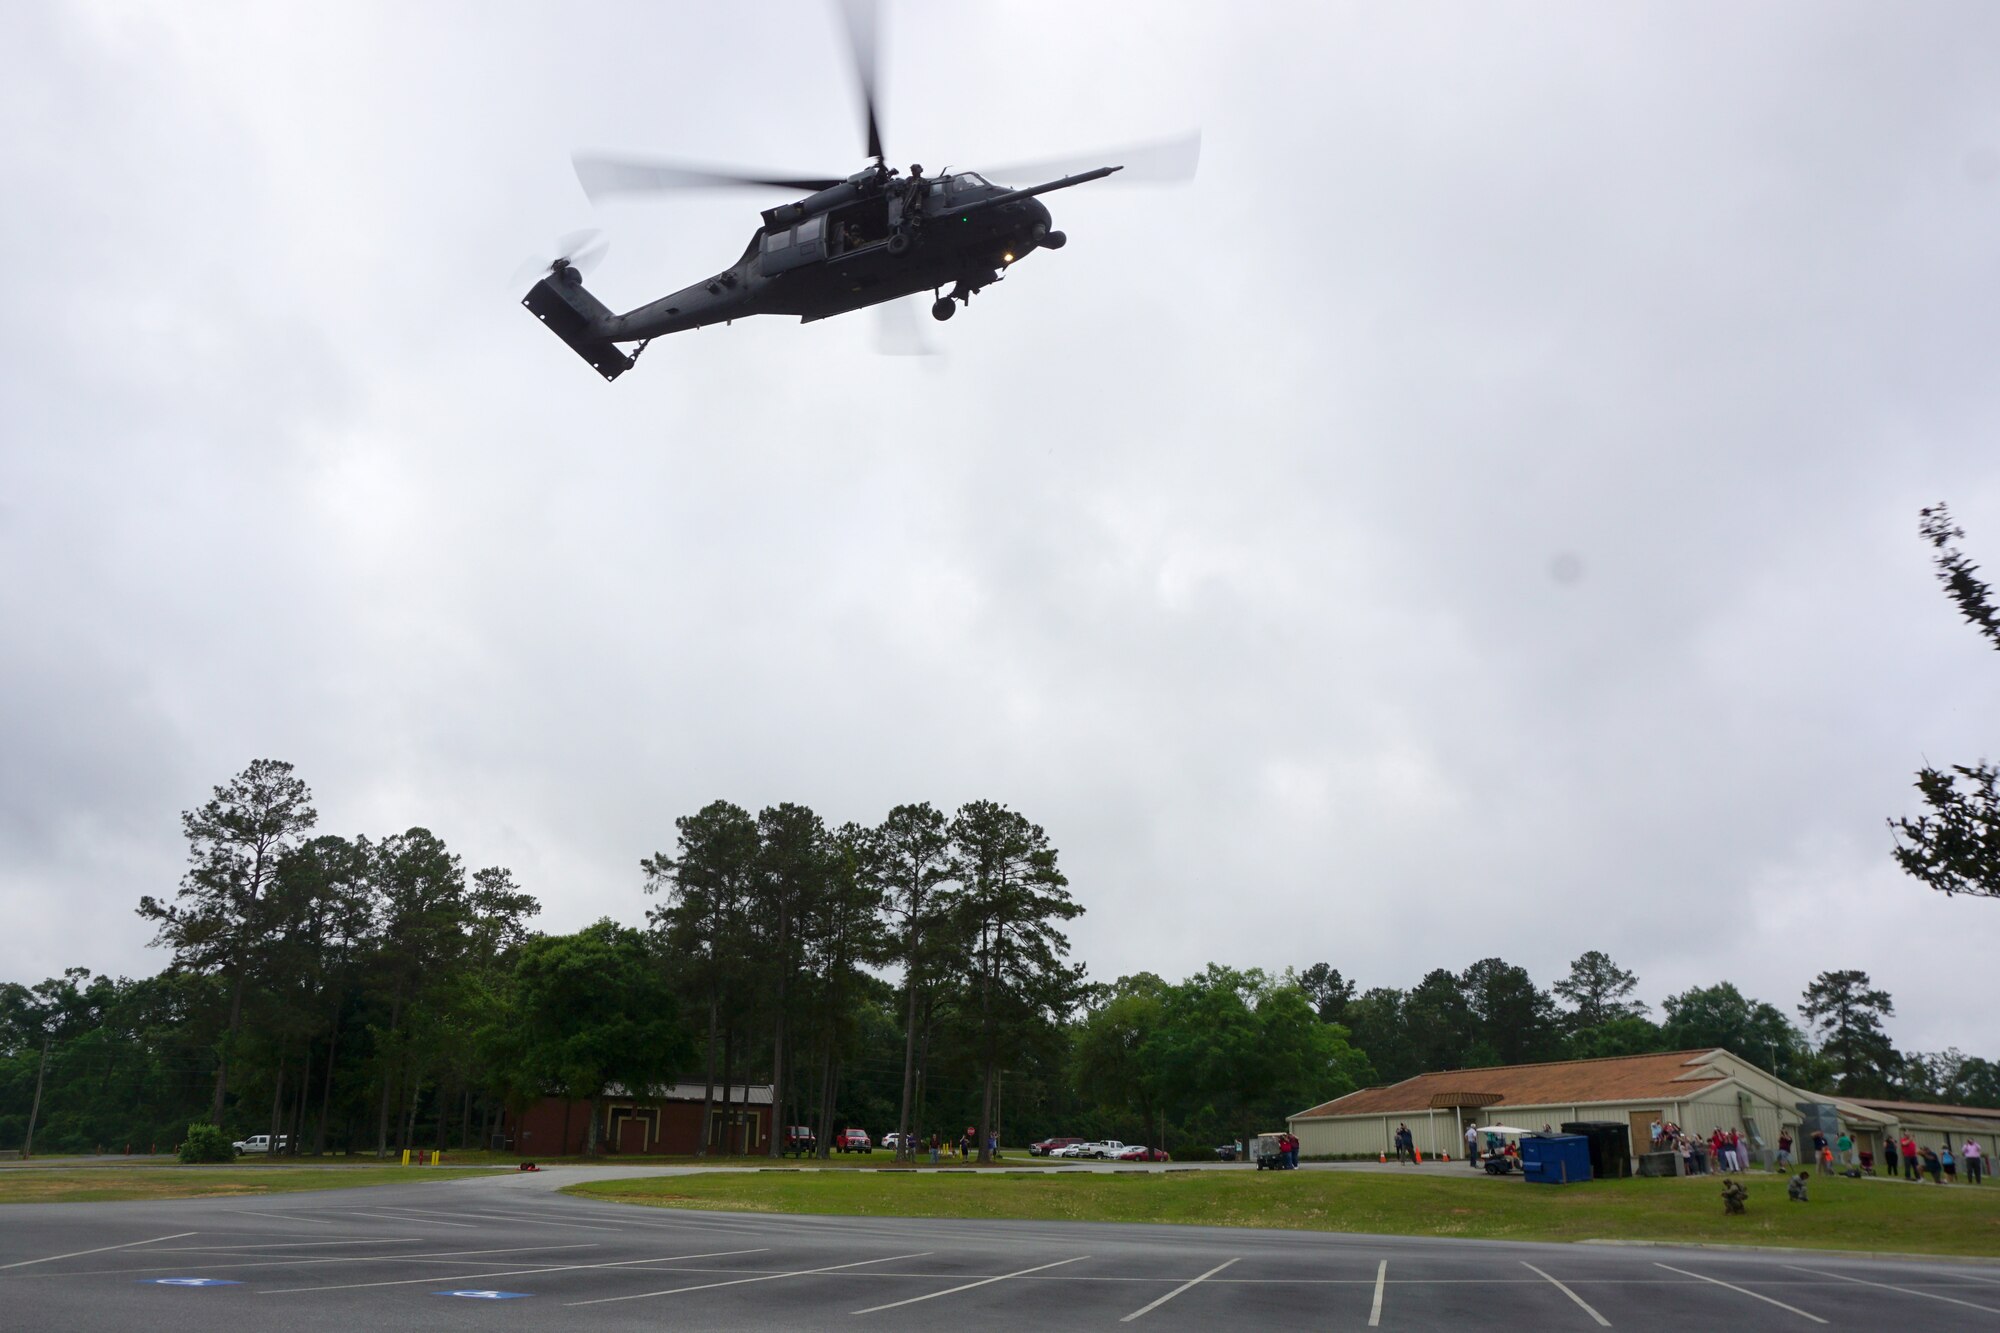 Pave Hawk lands at Museum of Aviation